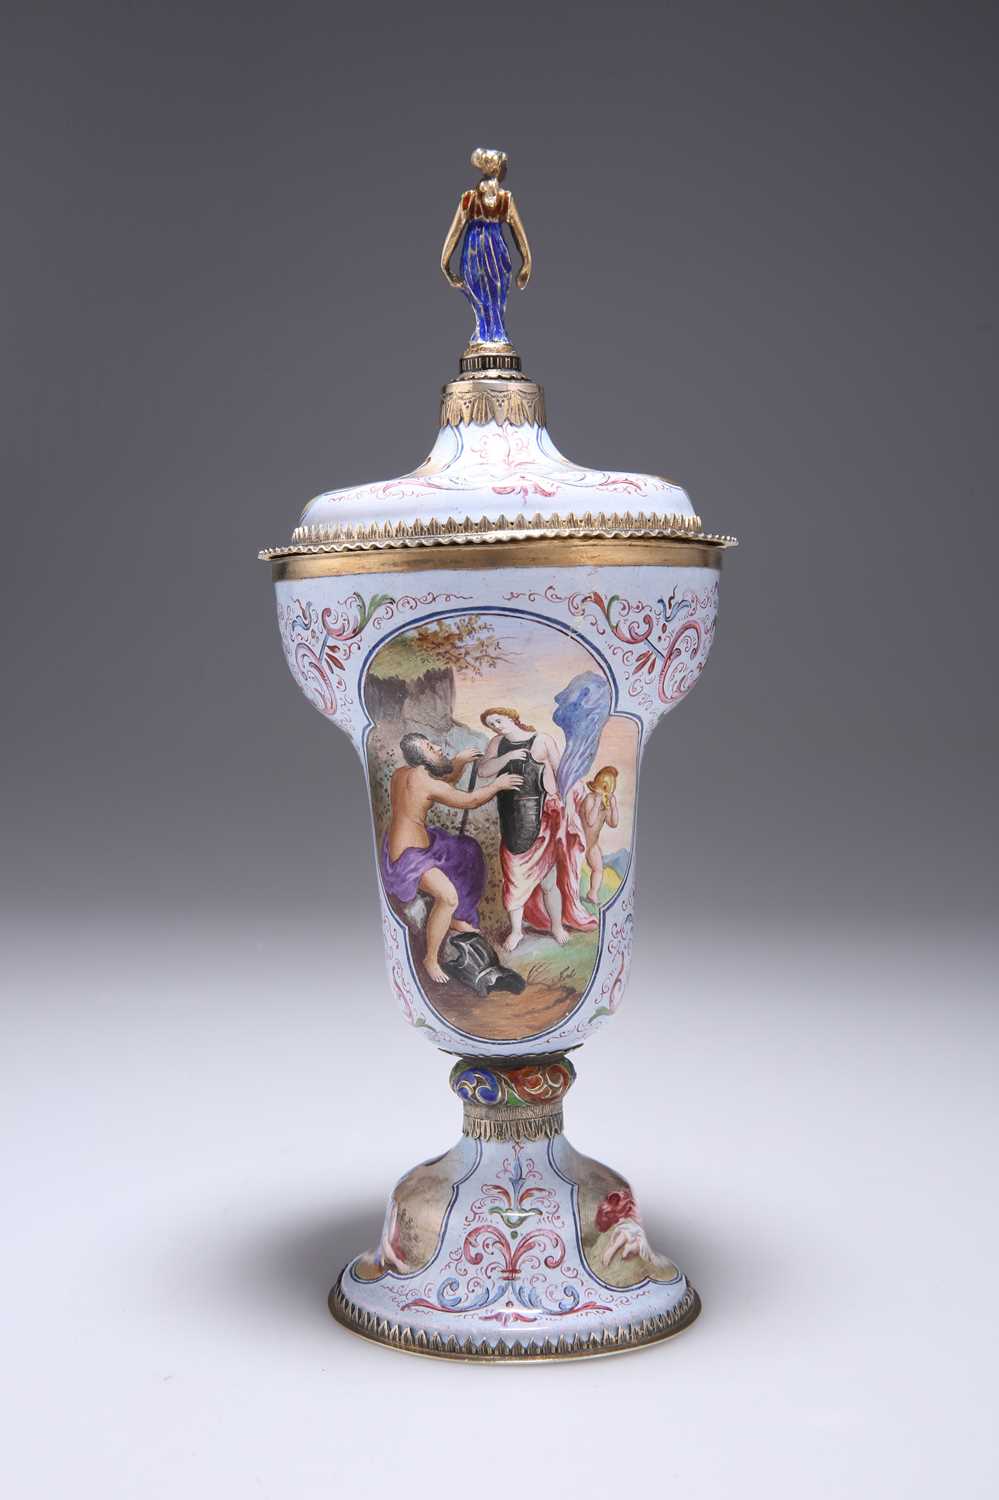 A FINE VIENNESE ENAMEL AND SILVER-GILT CUP AND COVER, BY HERMANN BOHM, CIRCA 1870 - Image 2 of 4